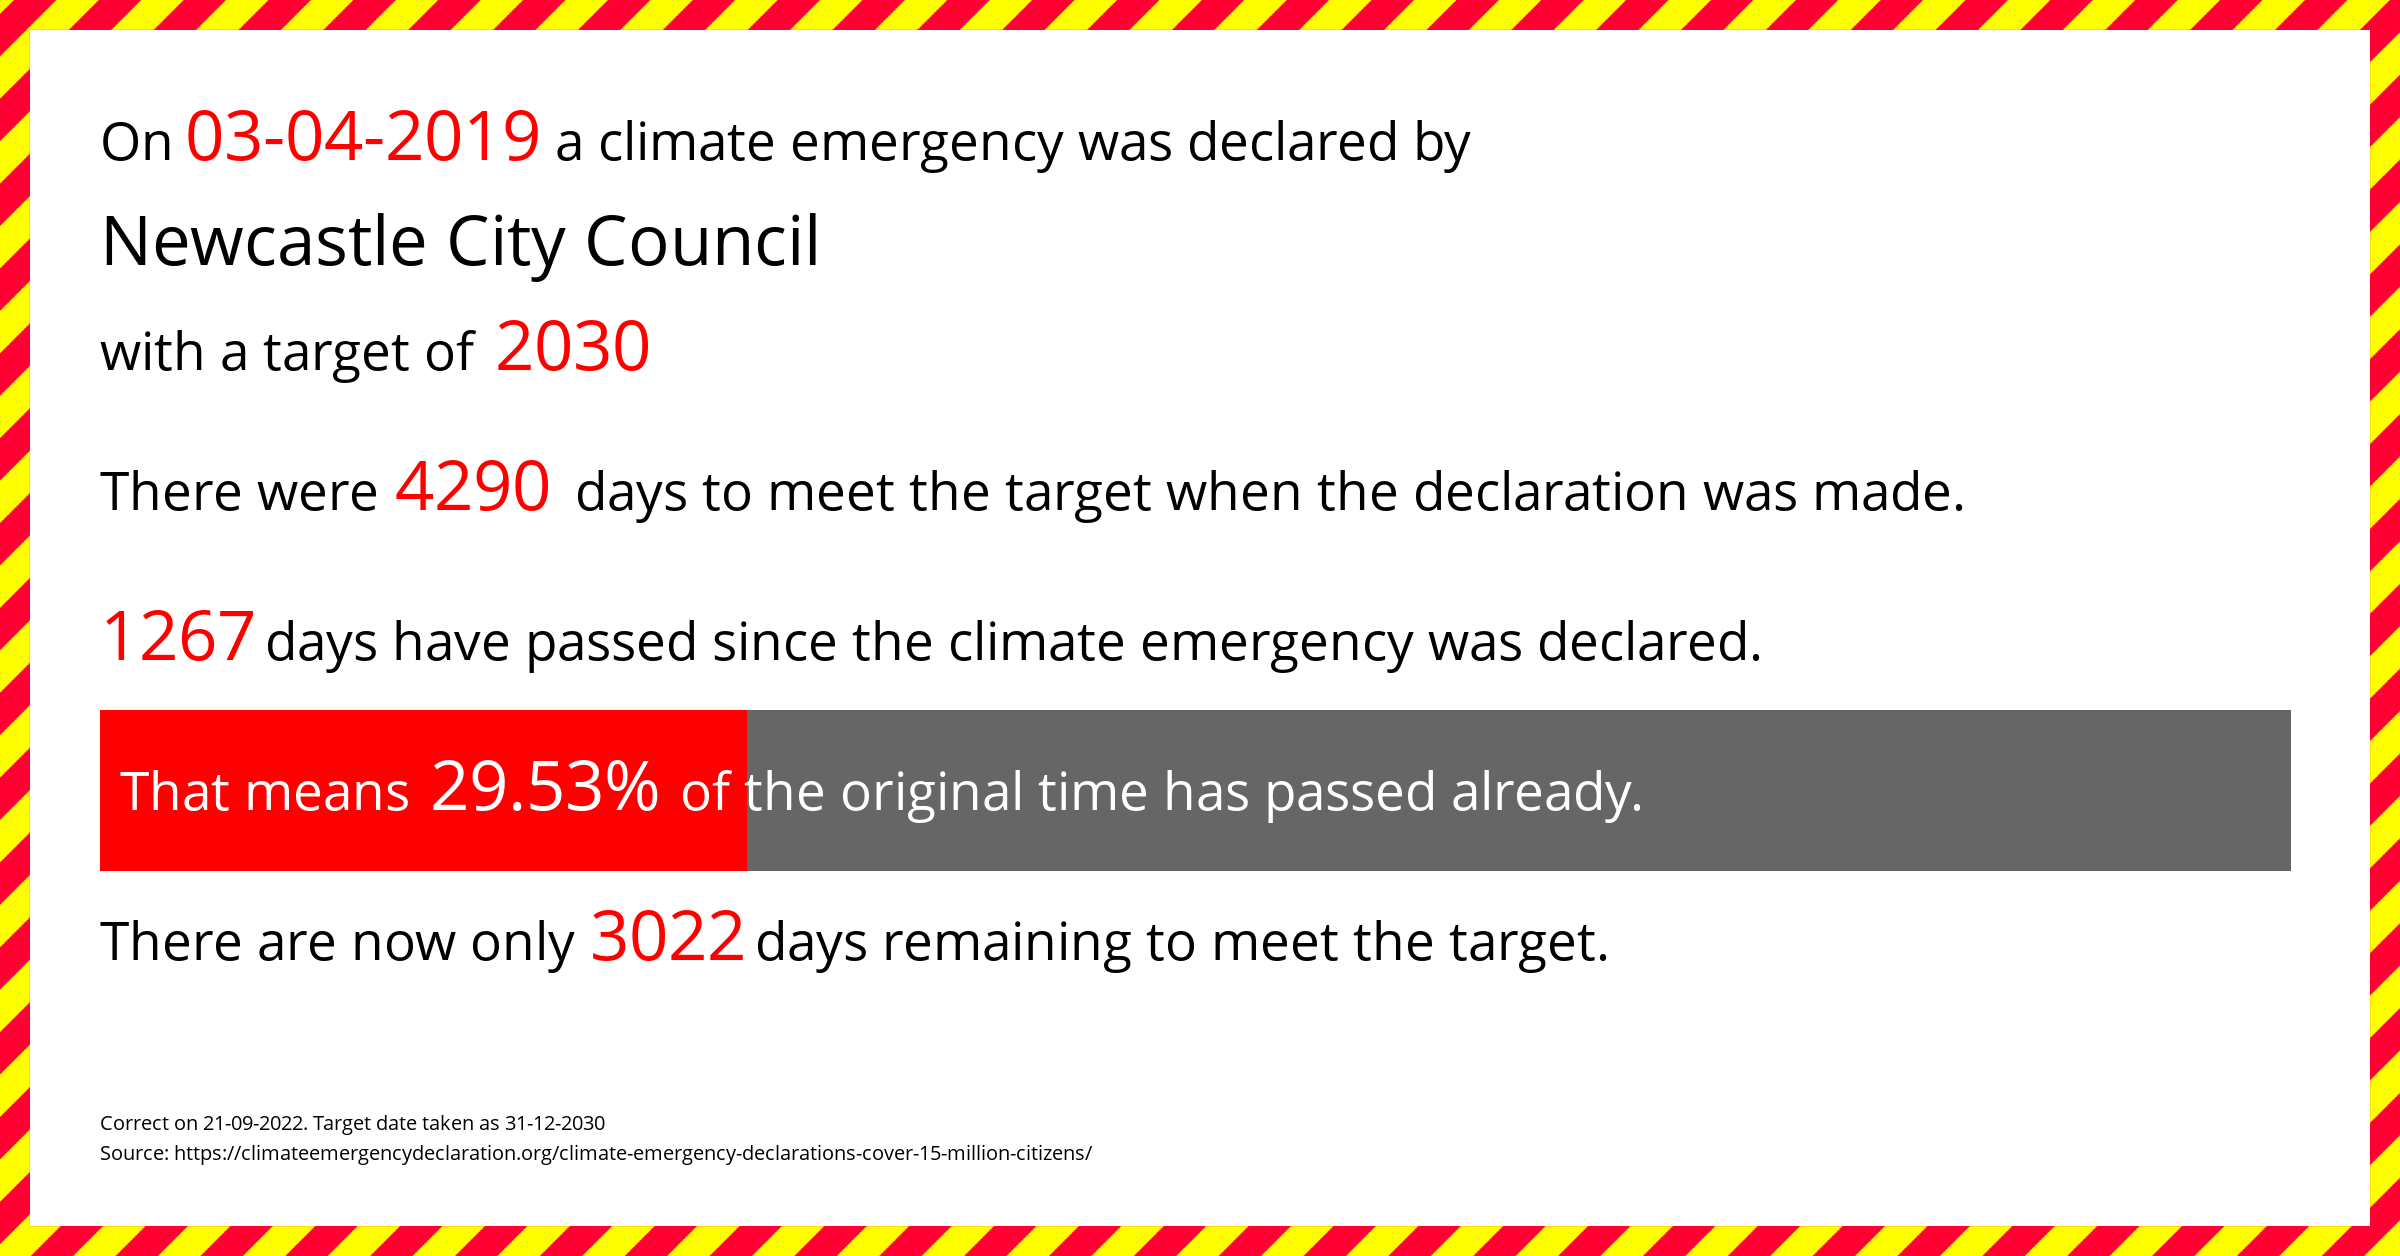 Text: Newcastle City Council declared a Climate emergency on Wednesday 3rd April 2019, with a target of 2030. There were 4290 days to meet the target when the declaration was made. 1267 days have passed since the climate emergency was declared. This means 29.53% of the original time has passed already. there are now only 3022 days remaining to meet the target.